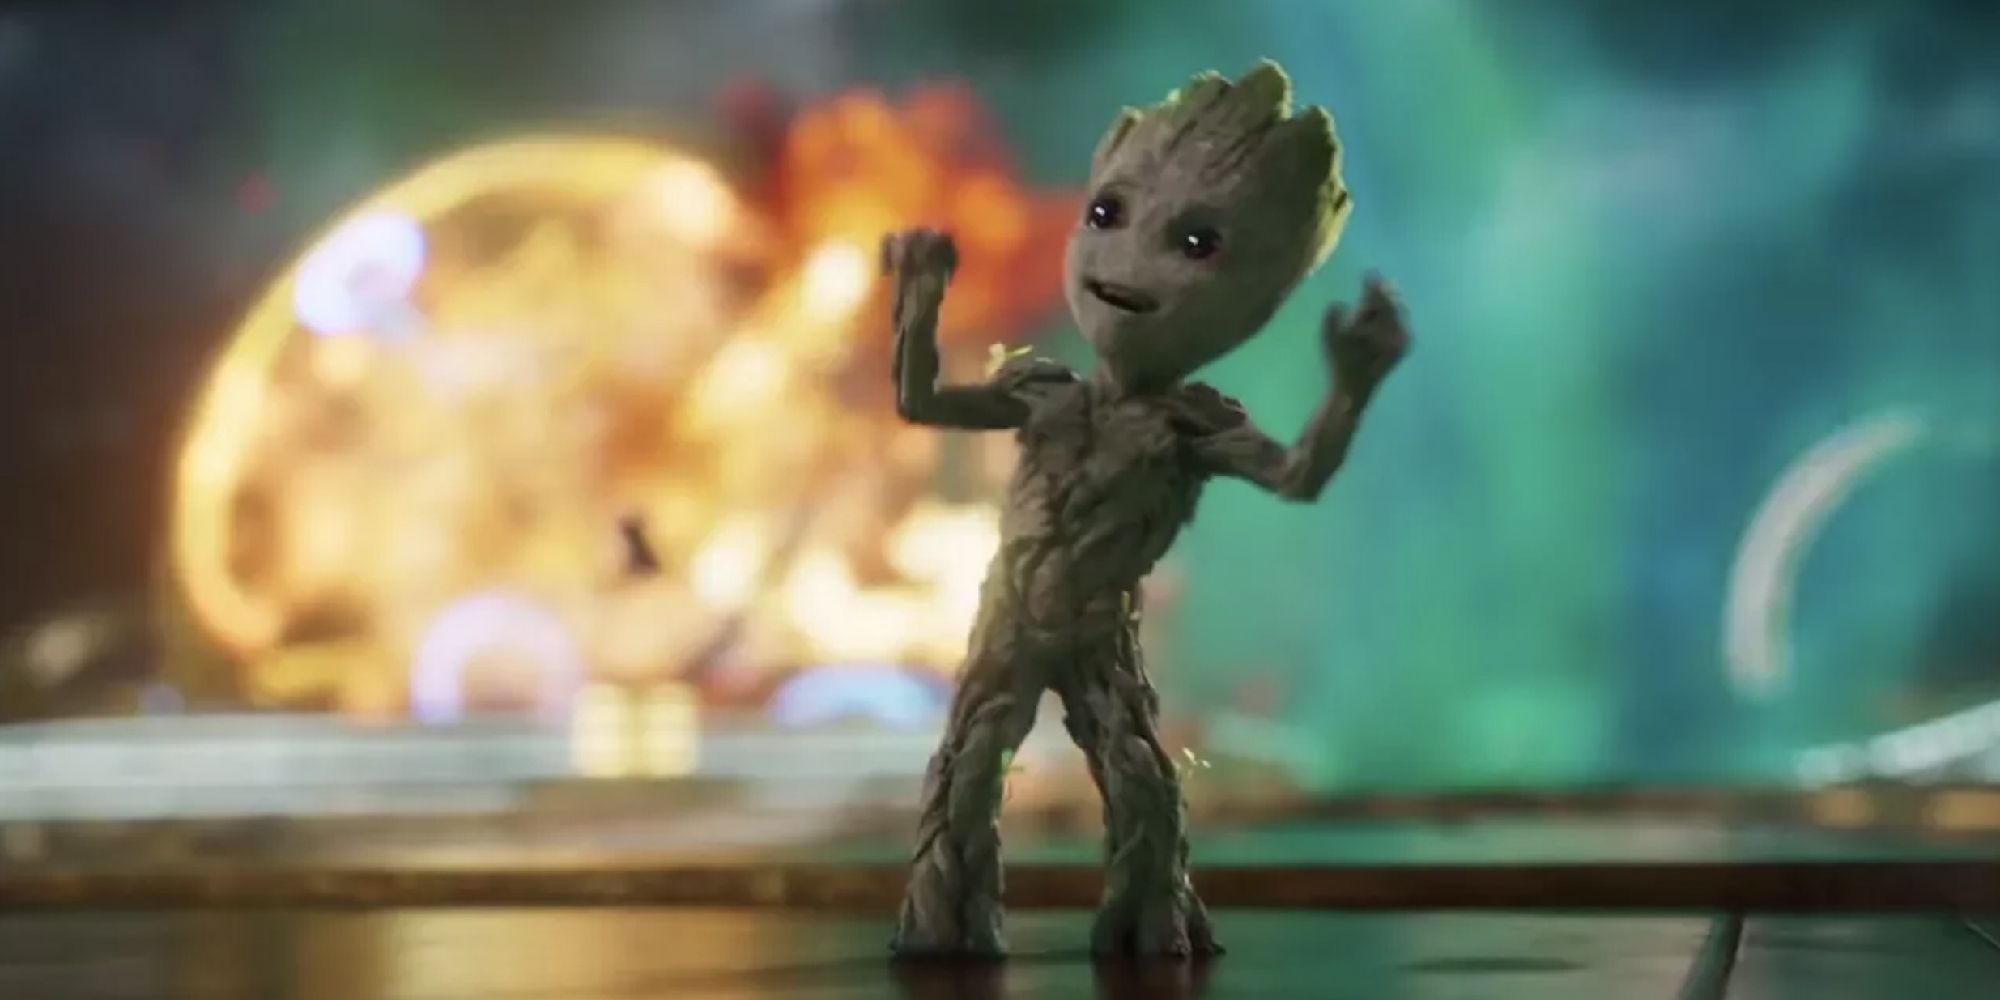 Baby Groot dancing to Electric Light Orchestra